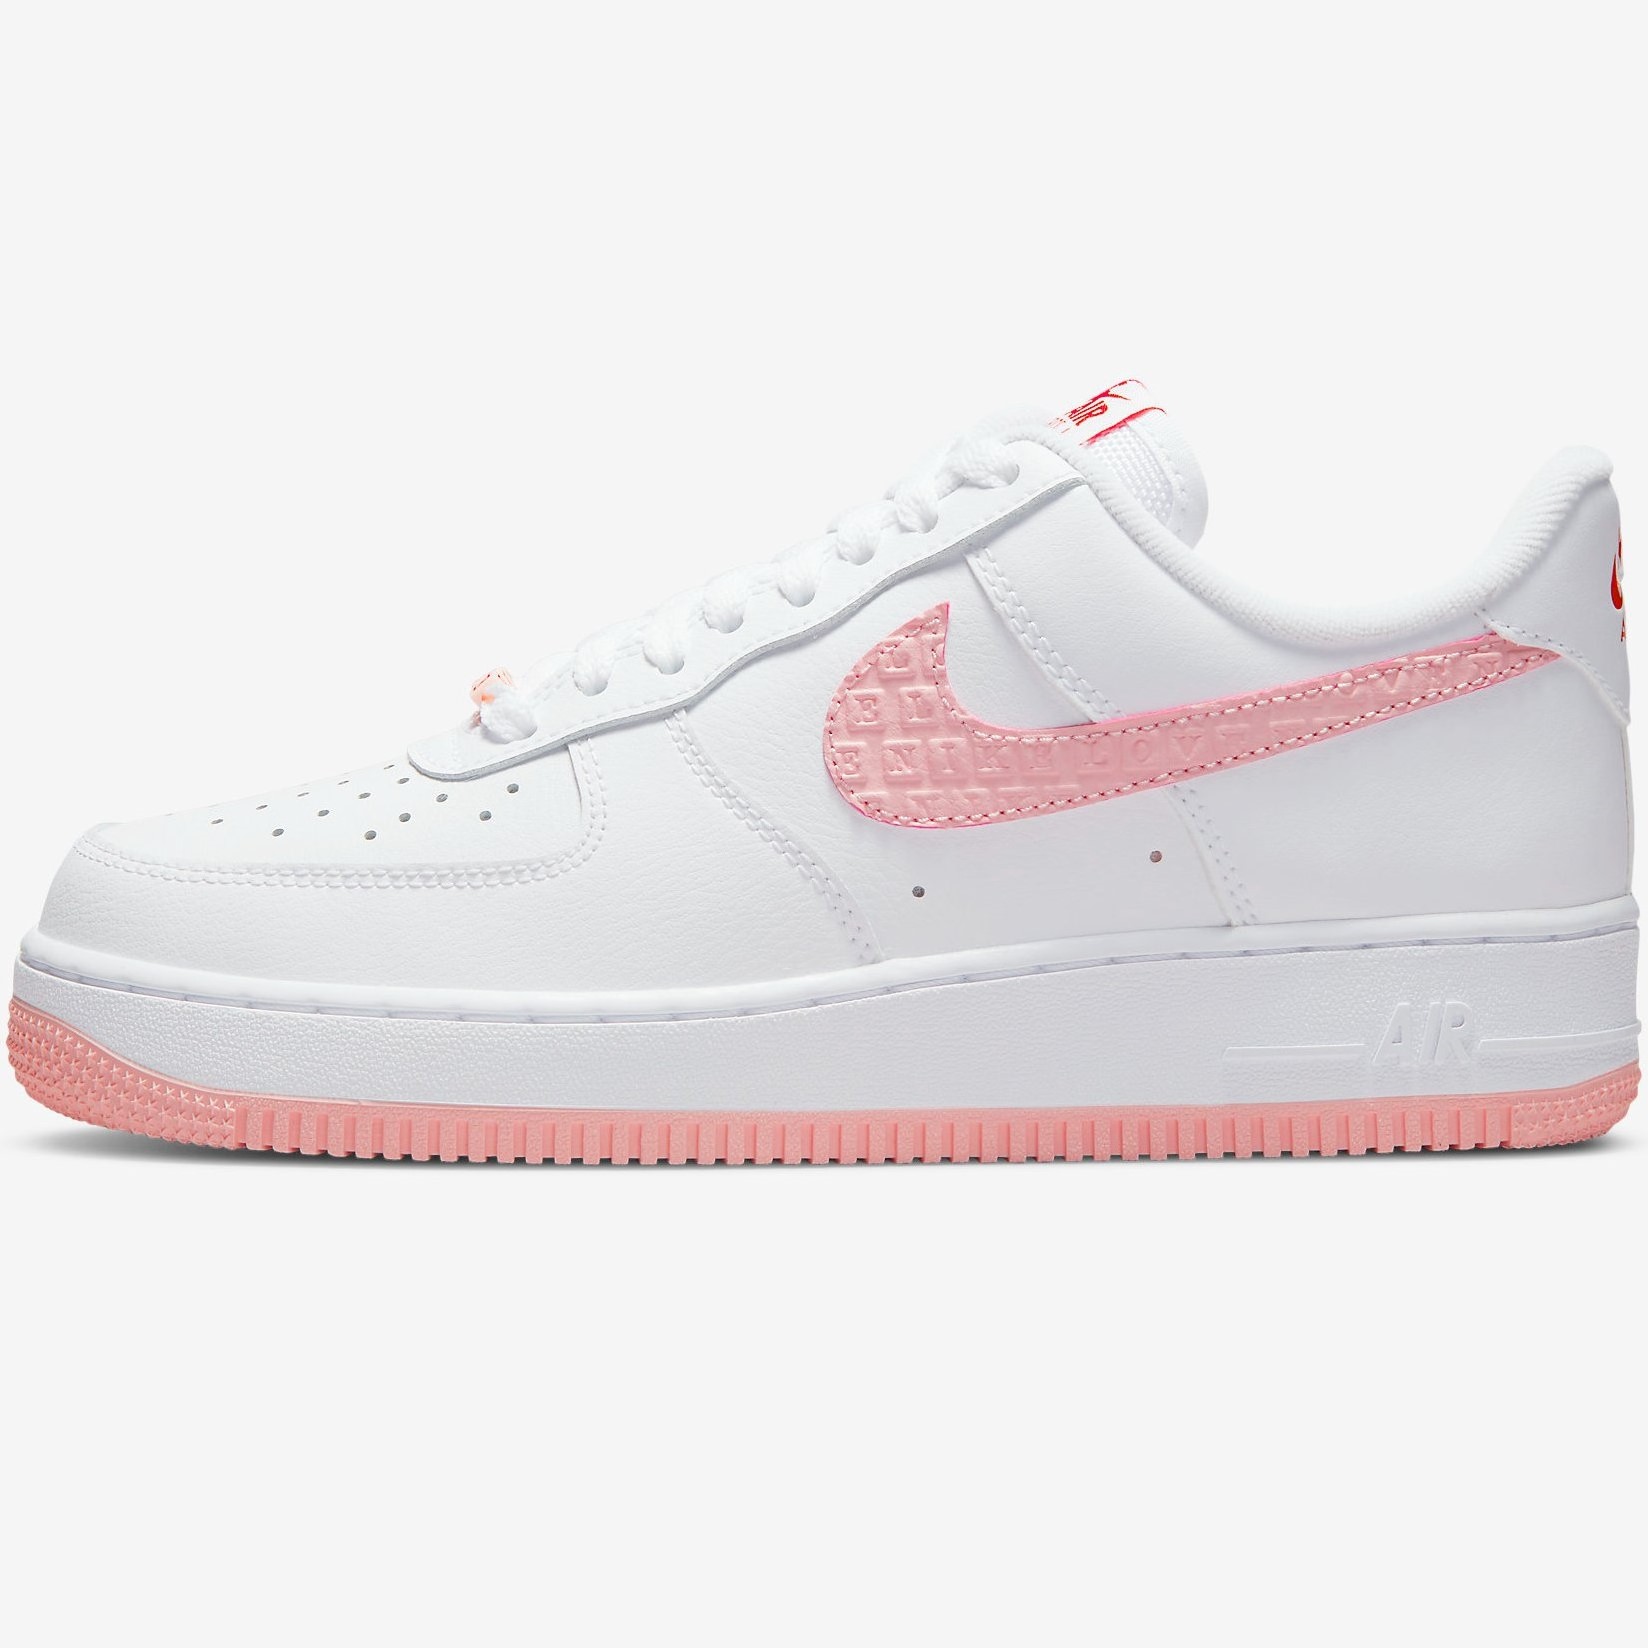 GIÀY NỮ NIKE AIR FORCE 1 07 LOW VD VALENTINE S DAY WHITE ATMOSPHERE UNIVERSITY RED SAIL DQ9320-100 12